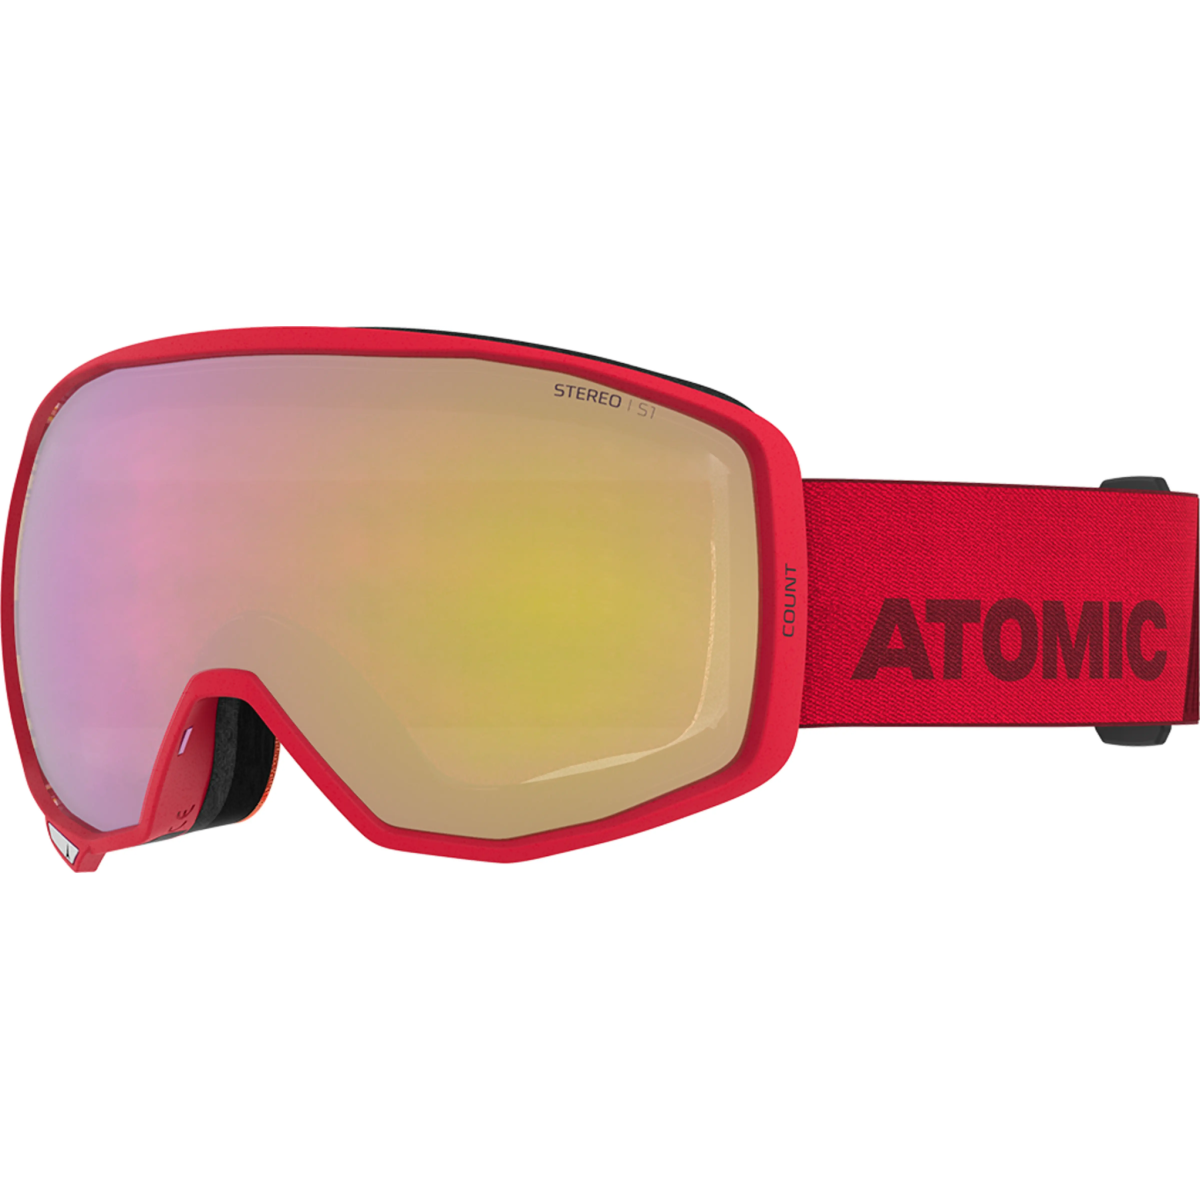 ATOMIC ATOMIC COUNT STEREO RED W/PINK YELLOW ST C1